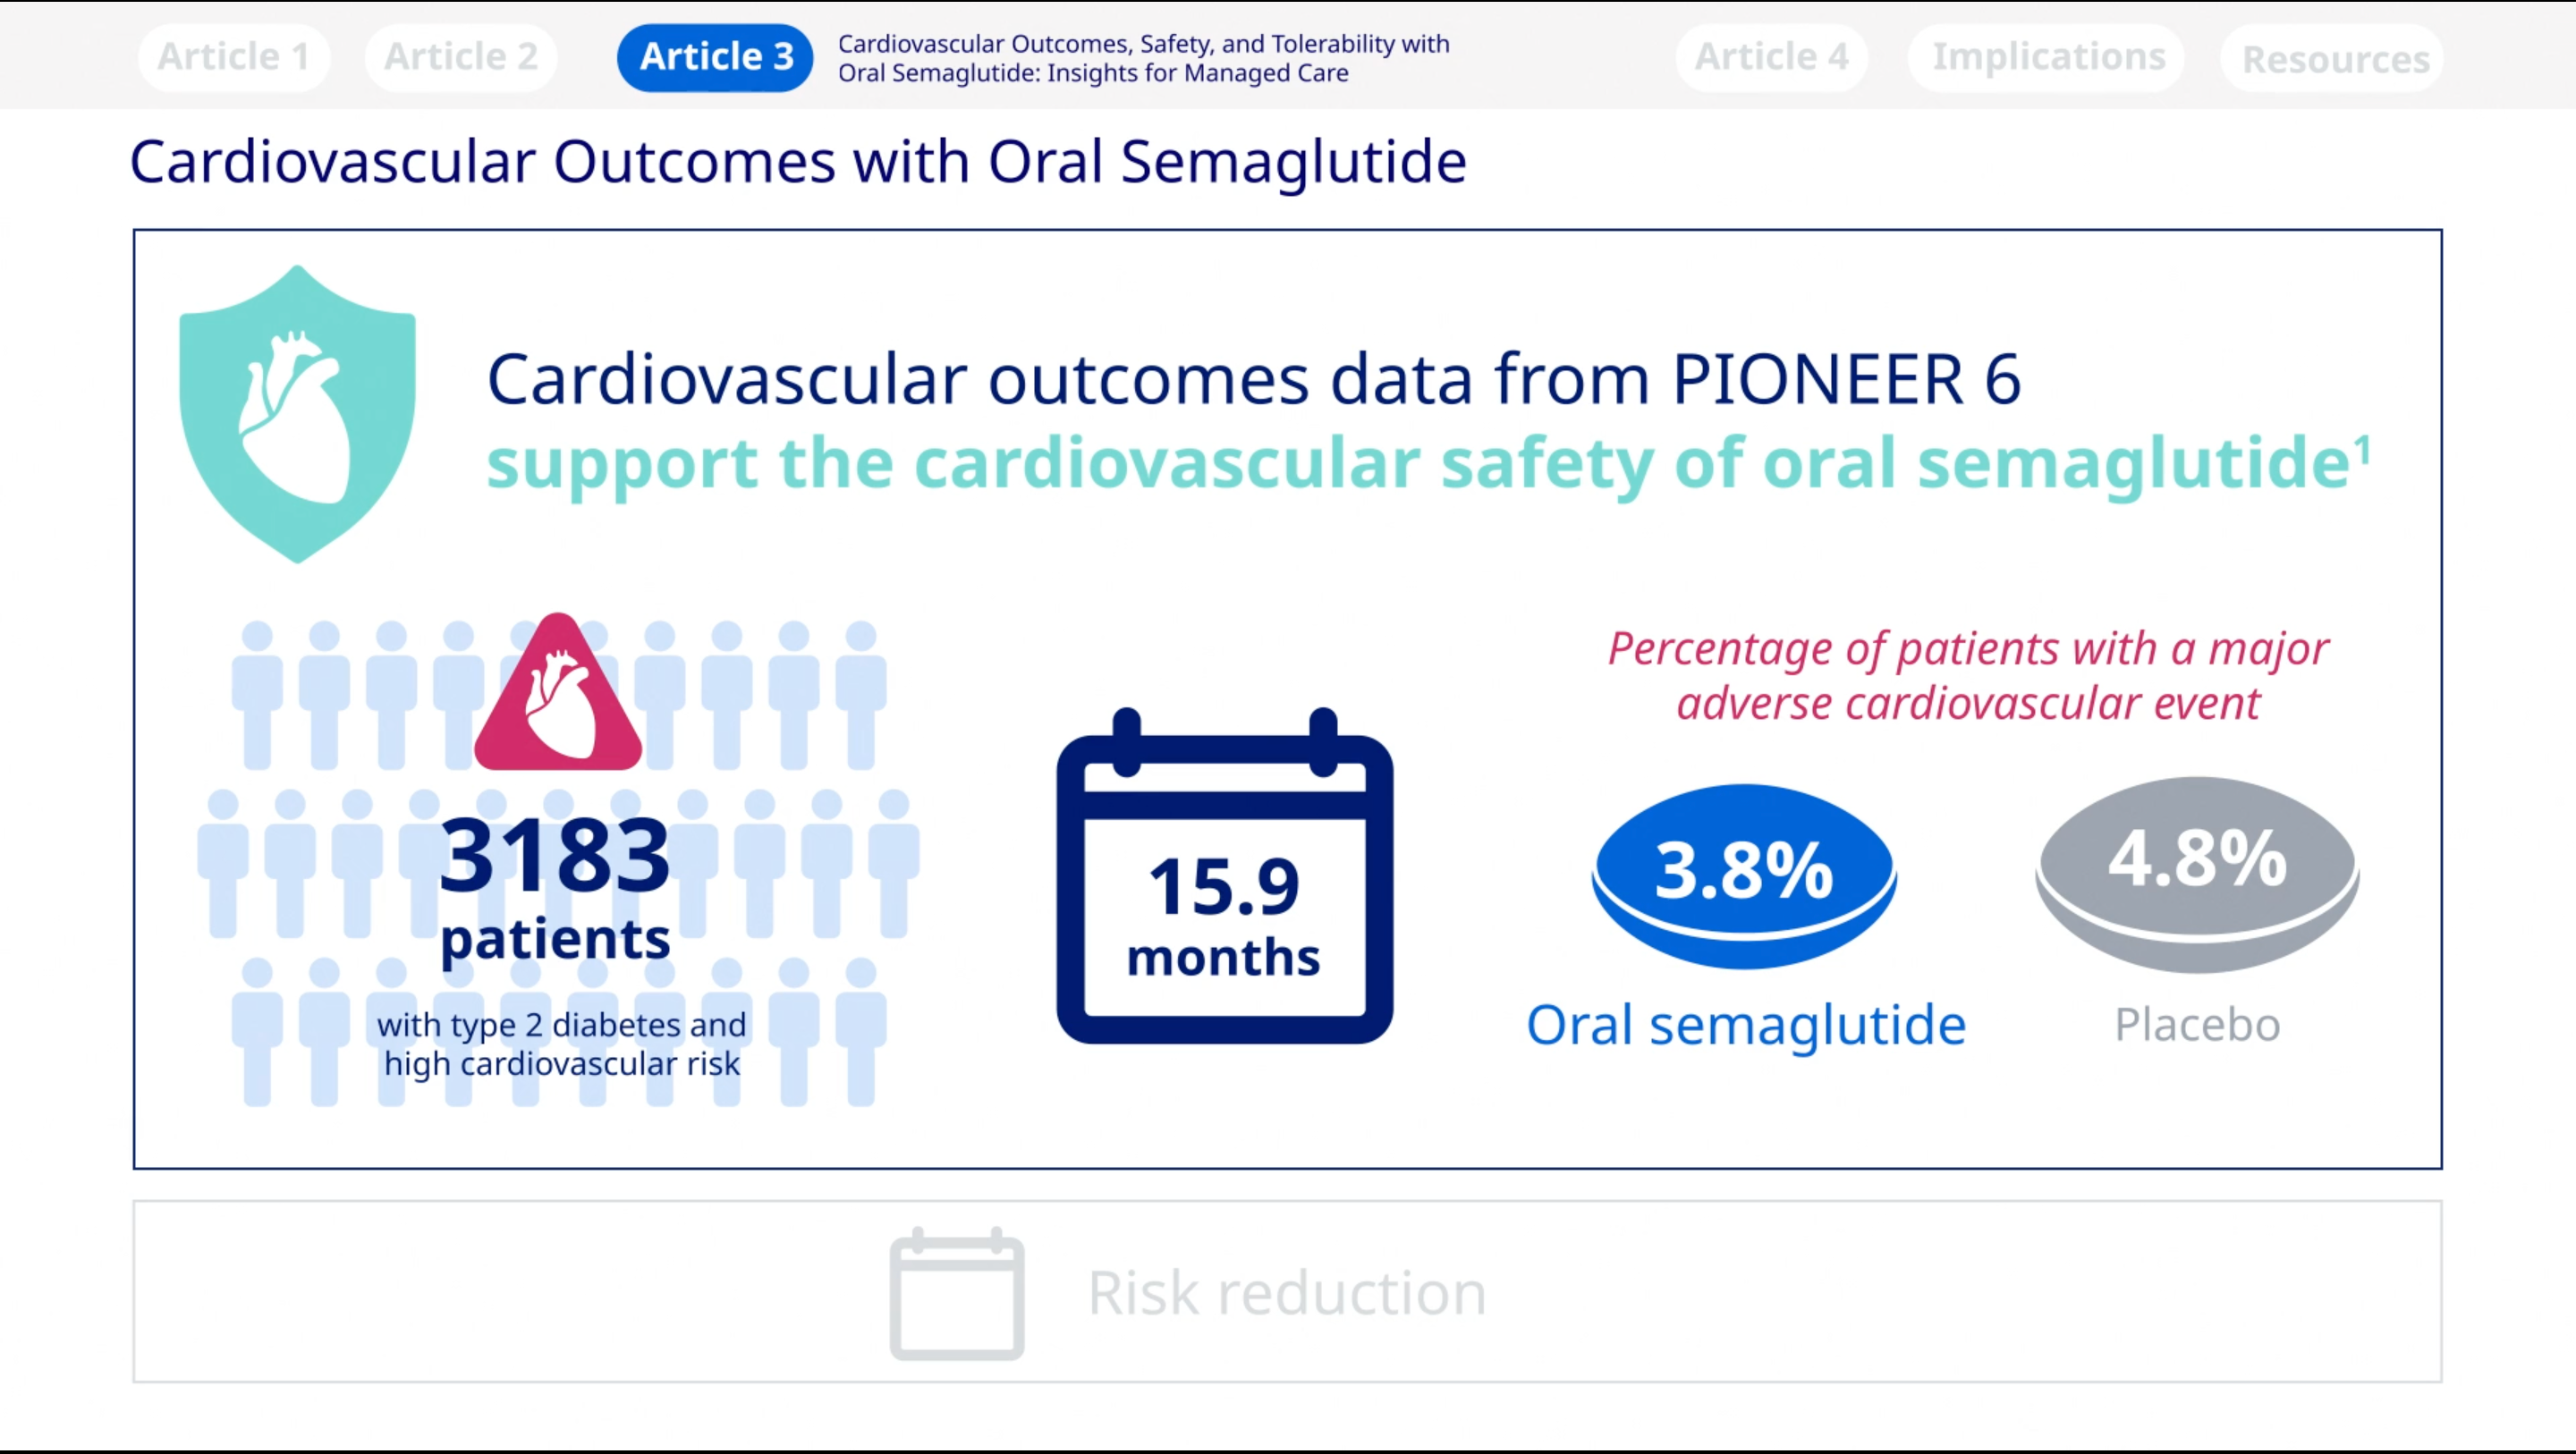 Oral Semaglutide: Cardiovascular Outcomes, Safety, and Tolerability